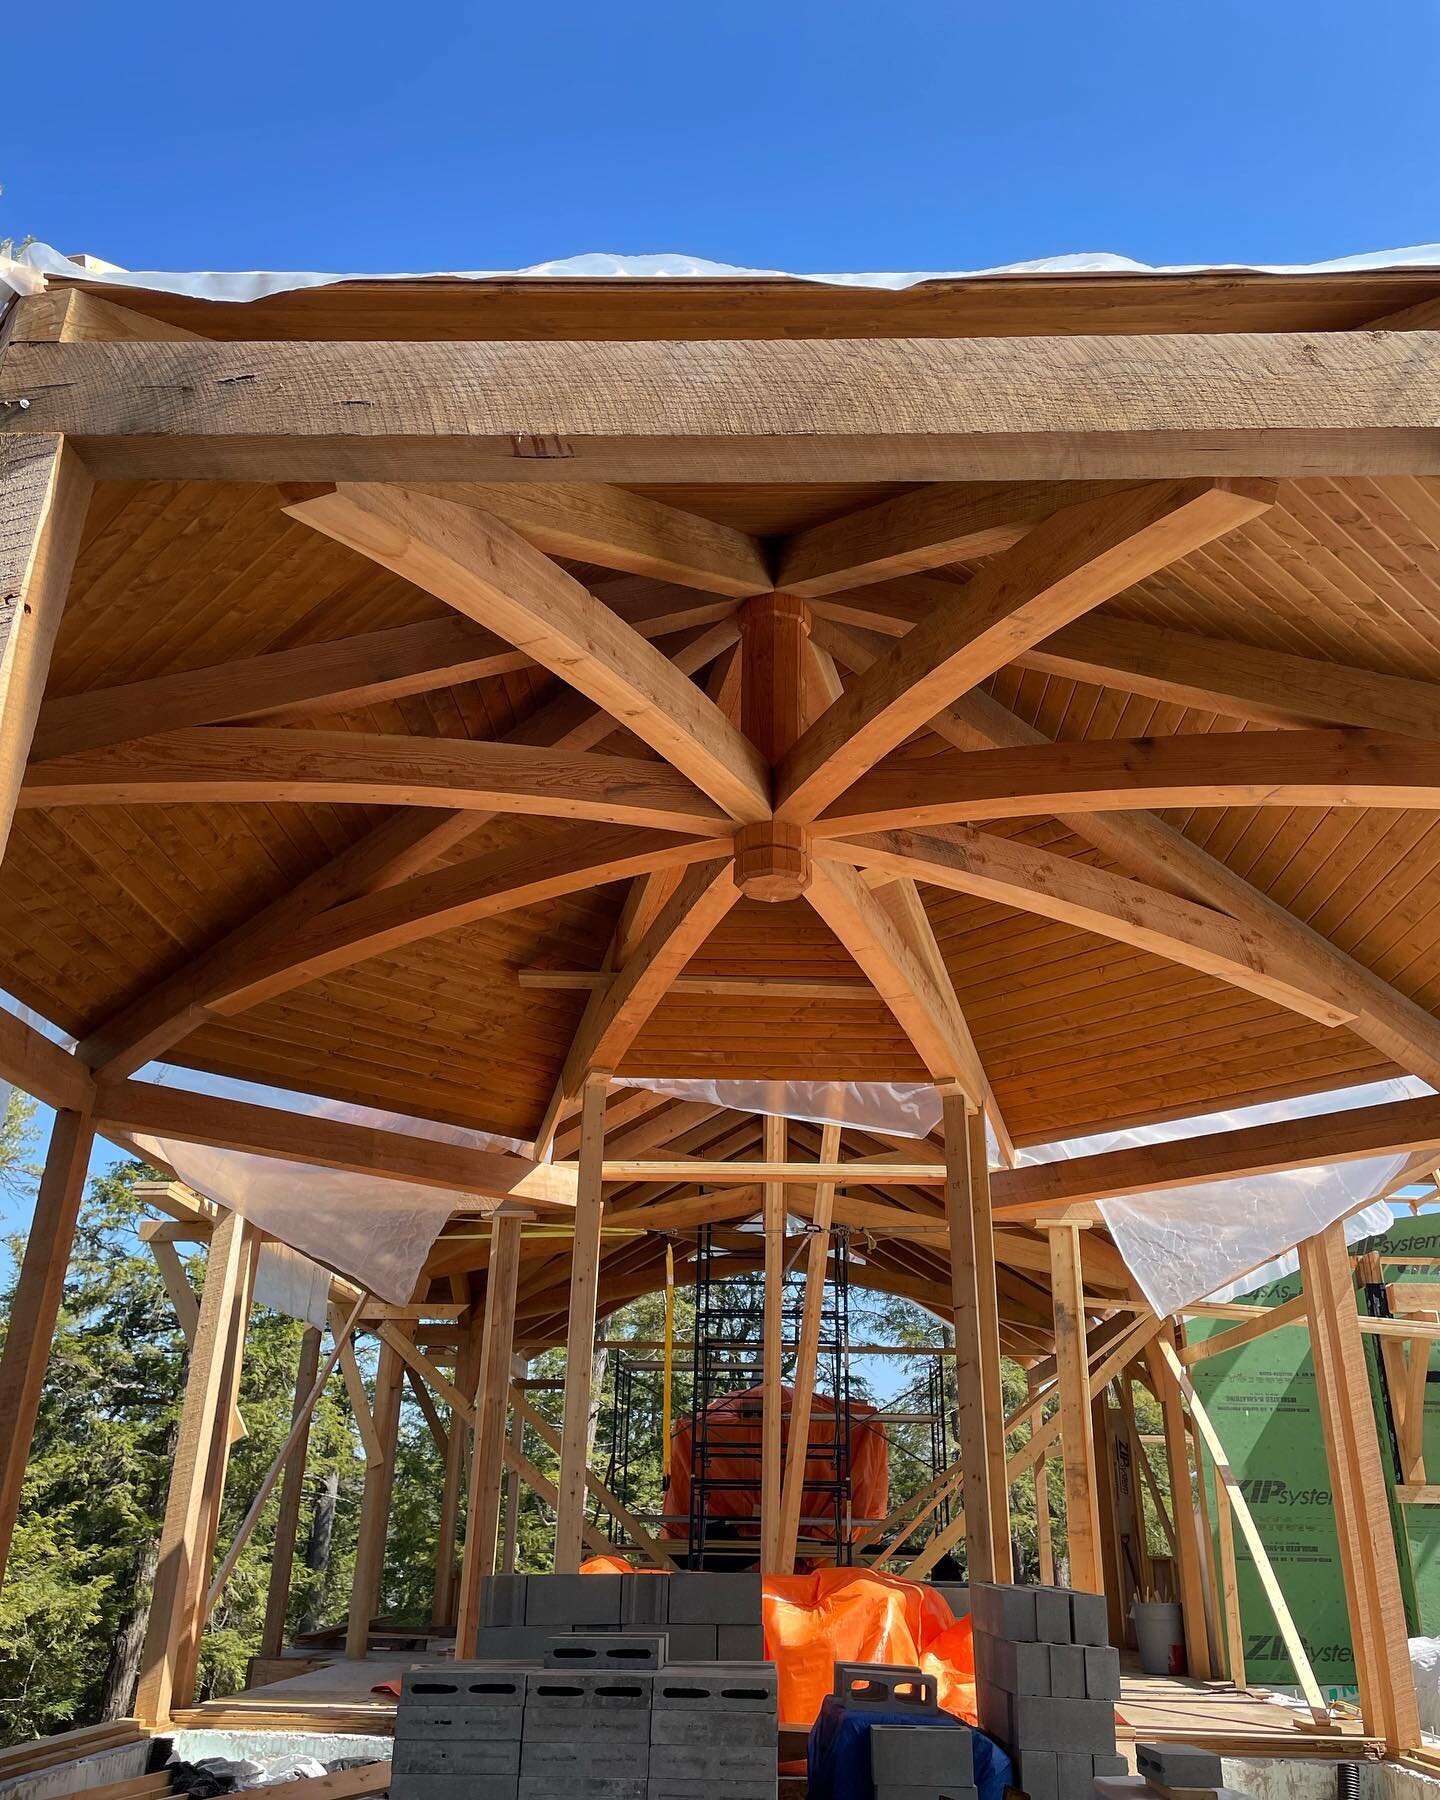 Check out the design of our Muskoka room&rsquo;s octagon roof. Using rough sawn Douglas fir, it gives an interesting texture and space.

#muskokacottage #customhomes #roughsawn #customhomebuilder